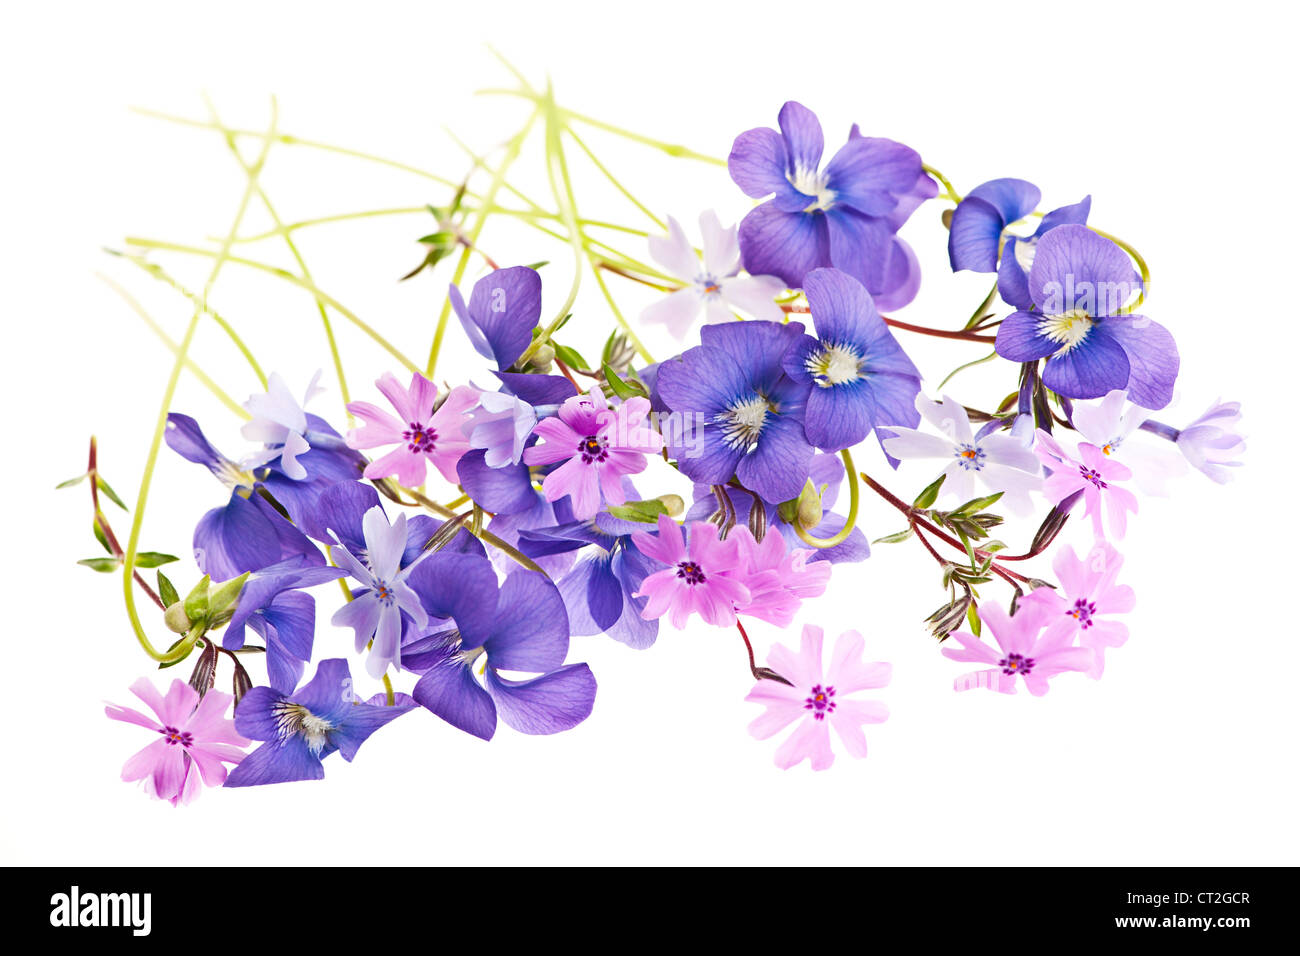 Purple violets and moss pink spring flowers arrangement isolated on white background Stock Photo